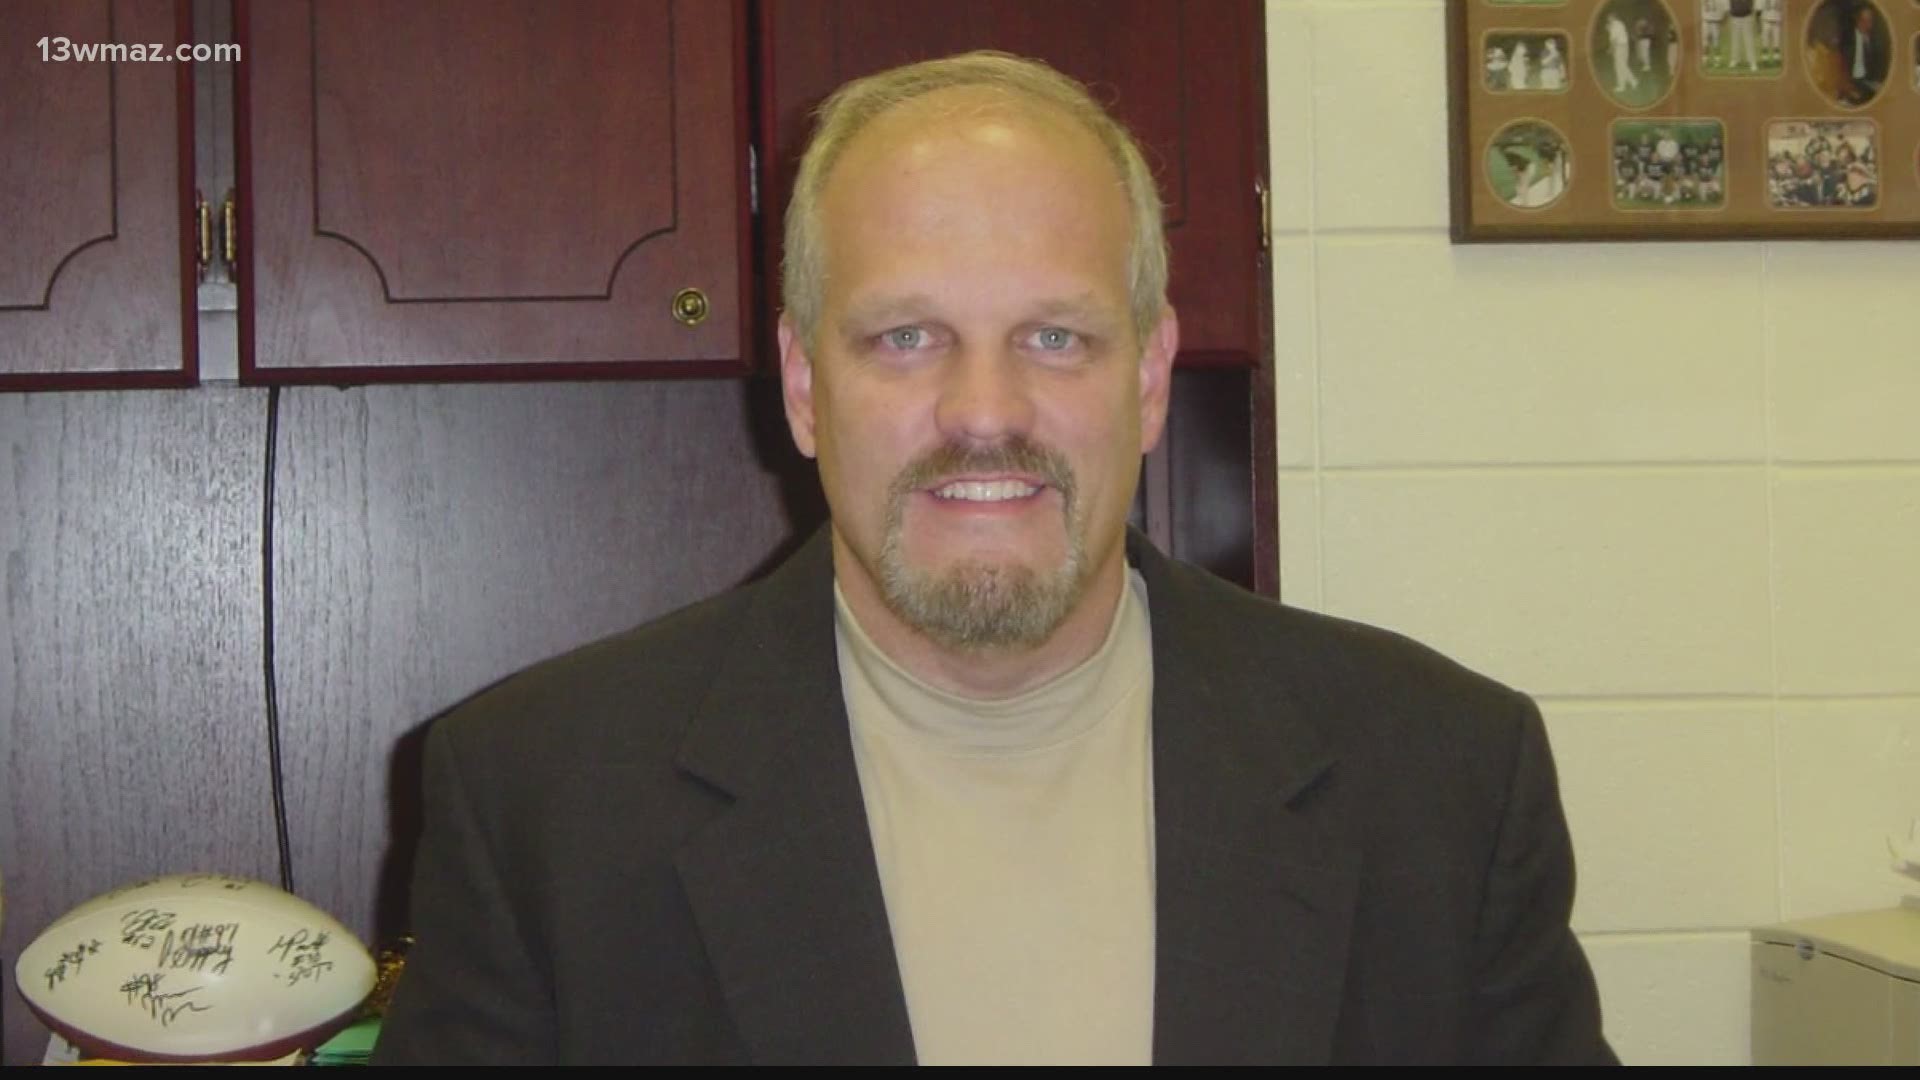 Tributes are beginning to pour in on social media after the death of Perry High School’s director of football operations.